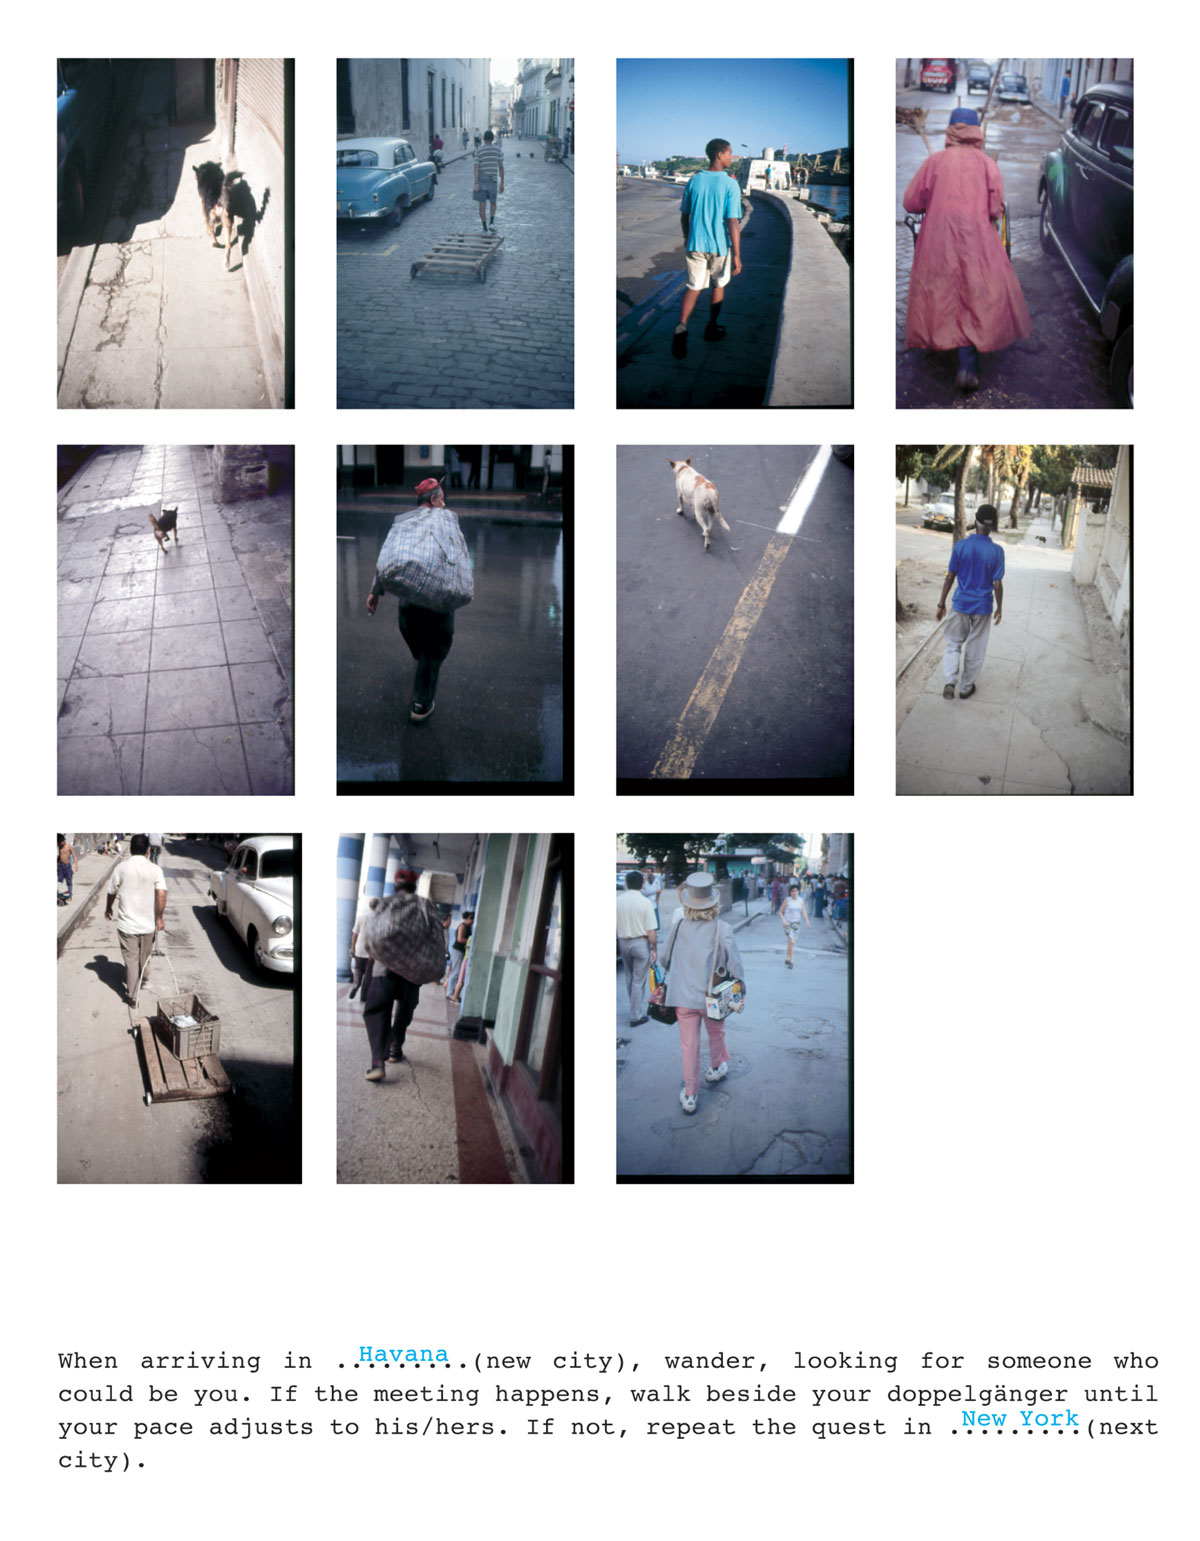 A series of eleven photographs by artist Francis Alÿs with the legend “When arriving in Havana (new city), wander, looking for someone who could be you. If the meeting happens, walk beside your dopplegänger until your pace adjusts to his/hers. If not, repeat the quest in New York (next city).”